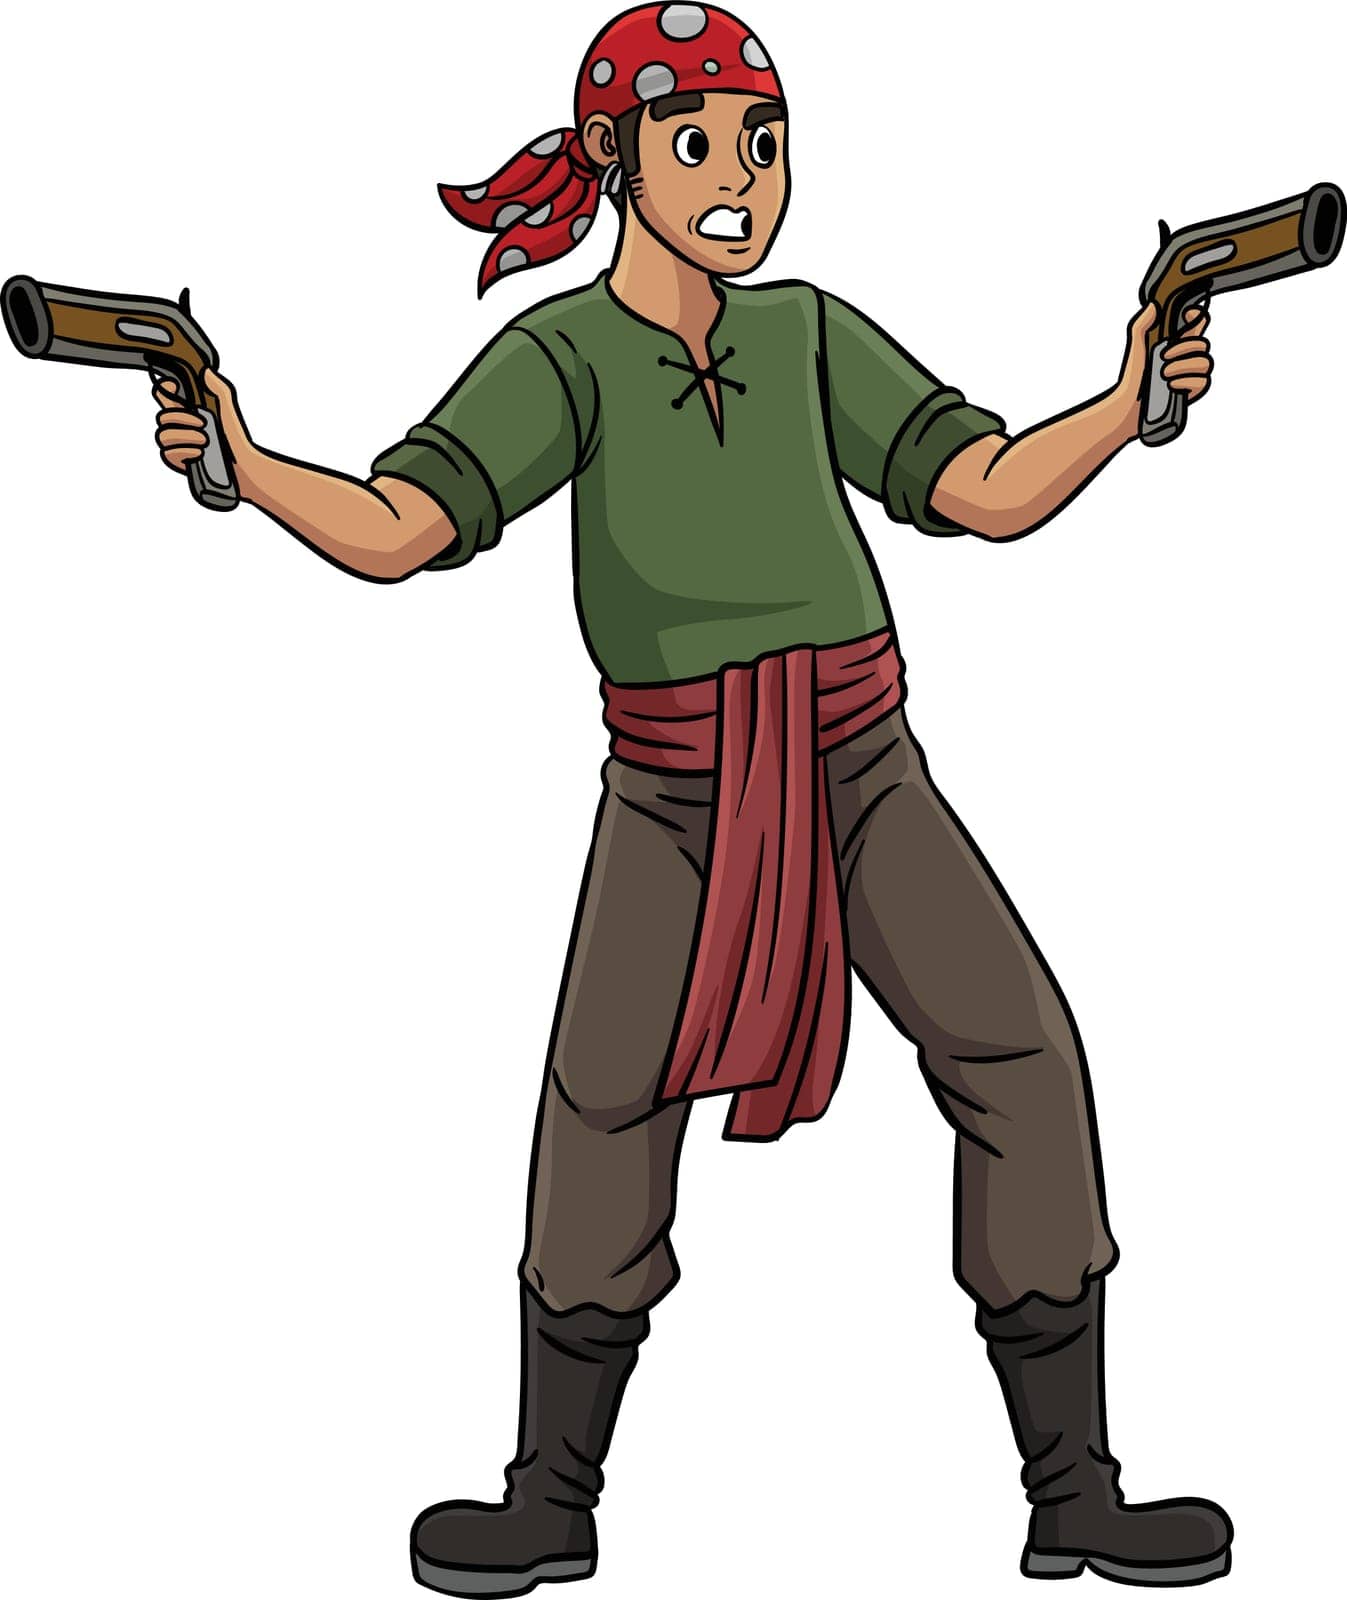 Pirate with a Gun Cartoon Colored Clipart by abbydesign